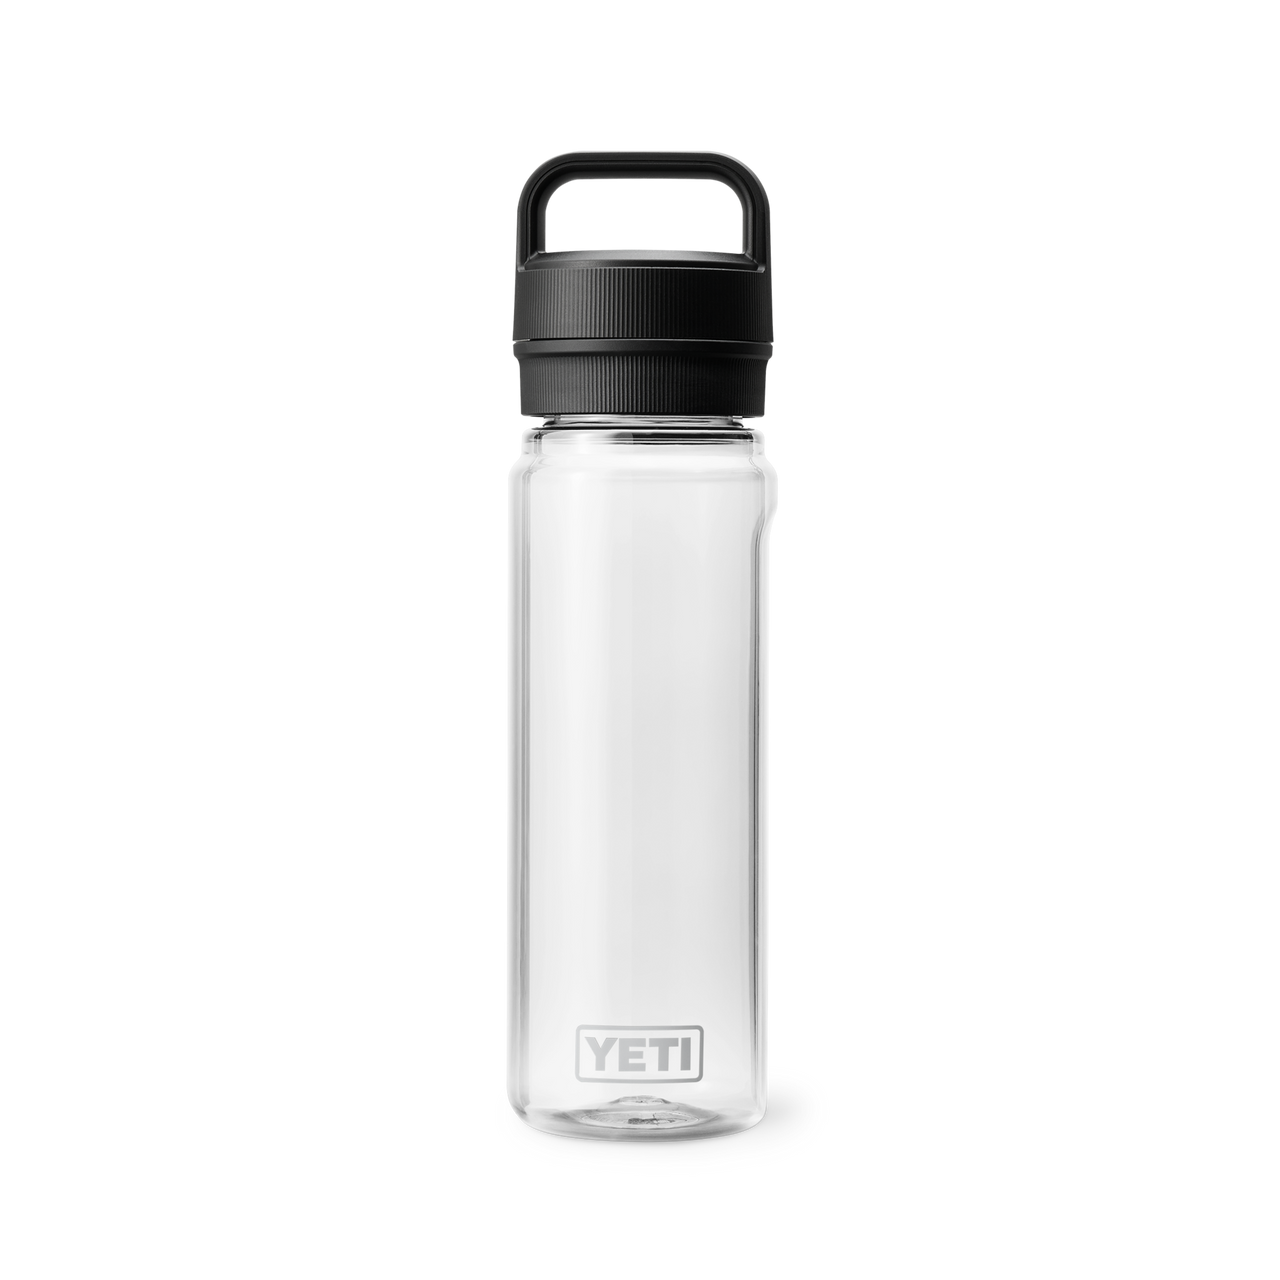 https://cdn11.bigcommerce.com/s-w7uww8kwfv/images/stencil/1280x1280/products/9142/22017/W-site_studio_Drinkware_Yonder_750mL_Clear_Front_0771_Primary_B_2400x2400__34685.1683223446.png?c=1